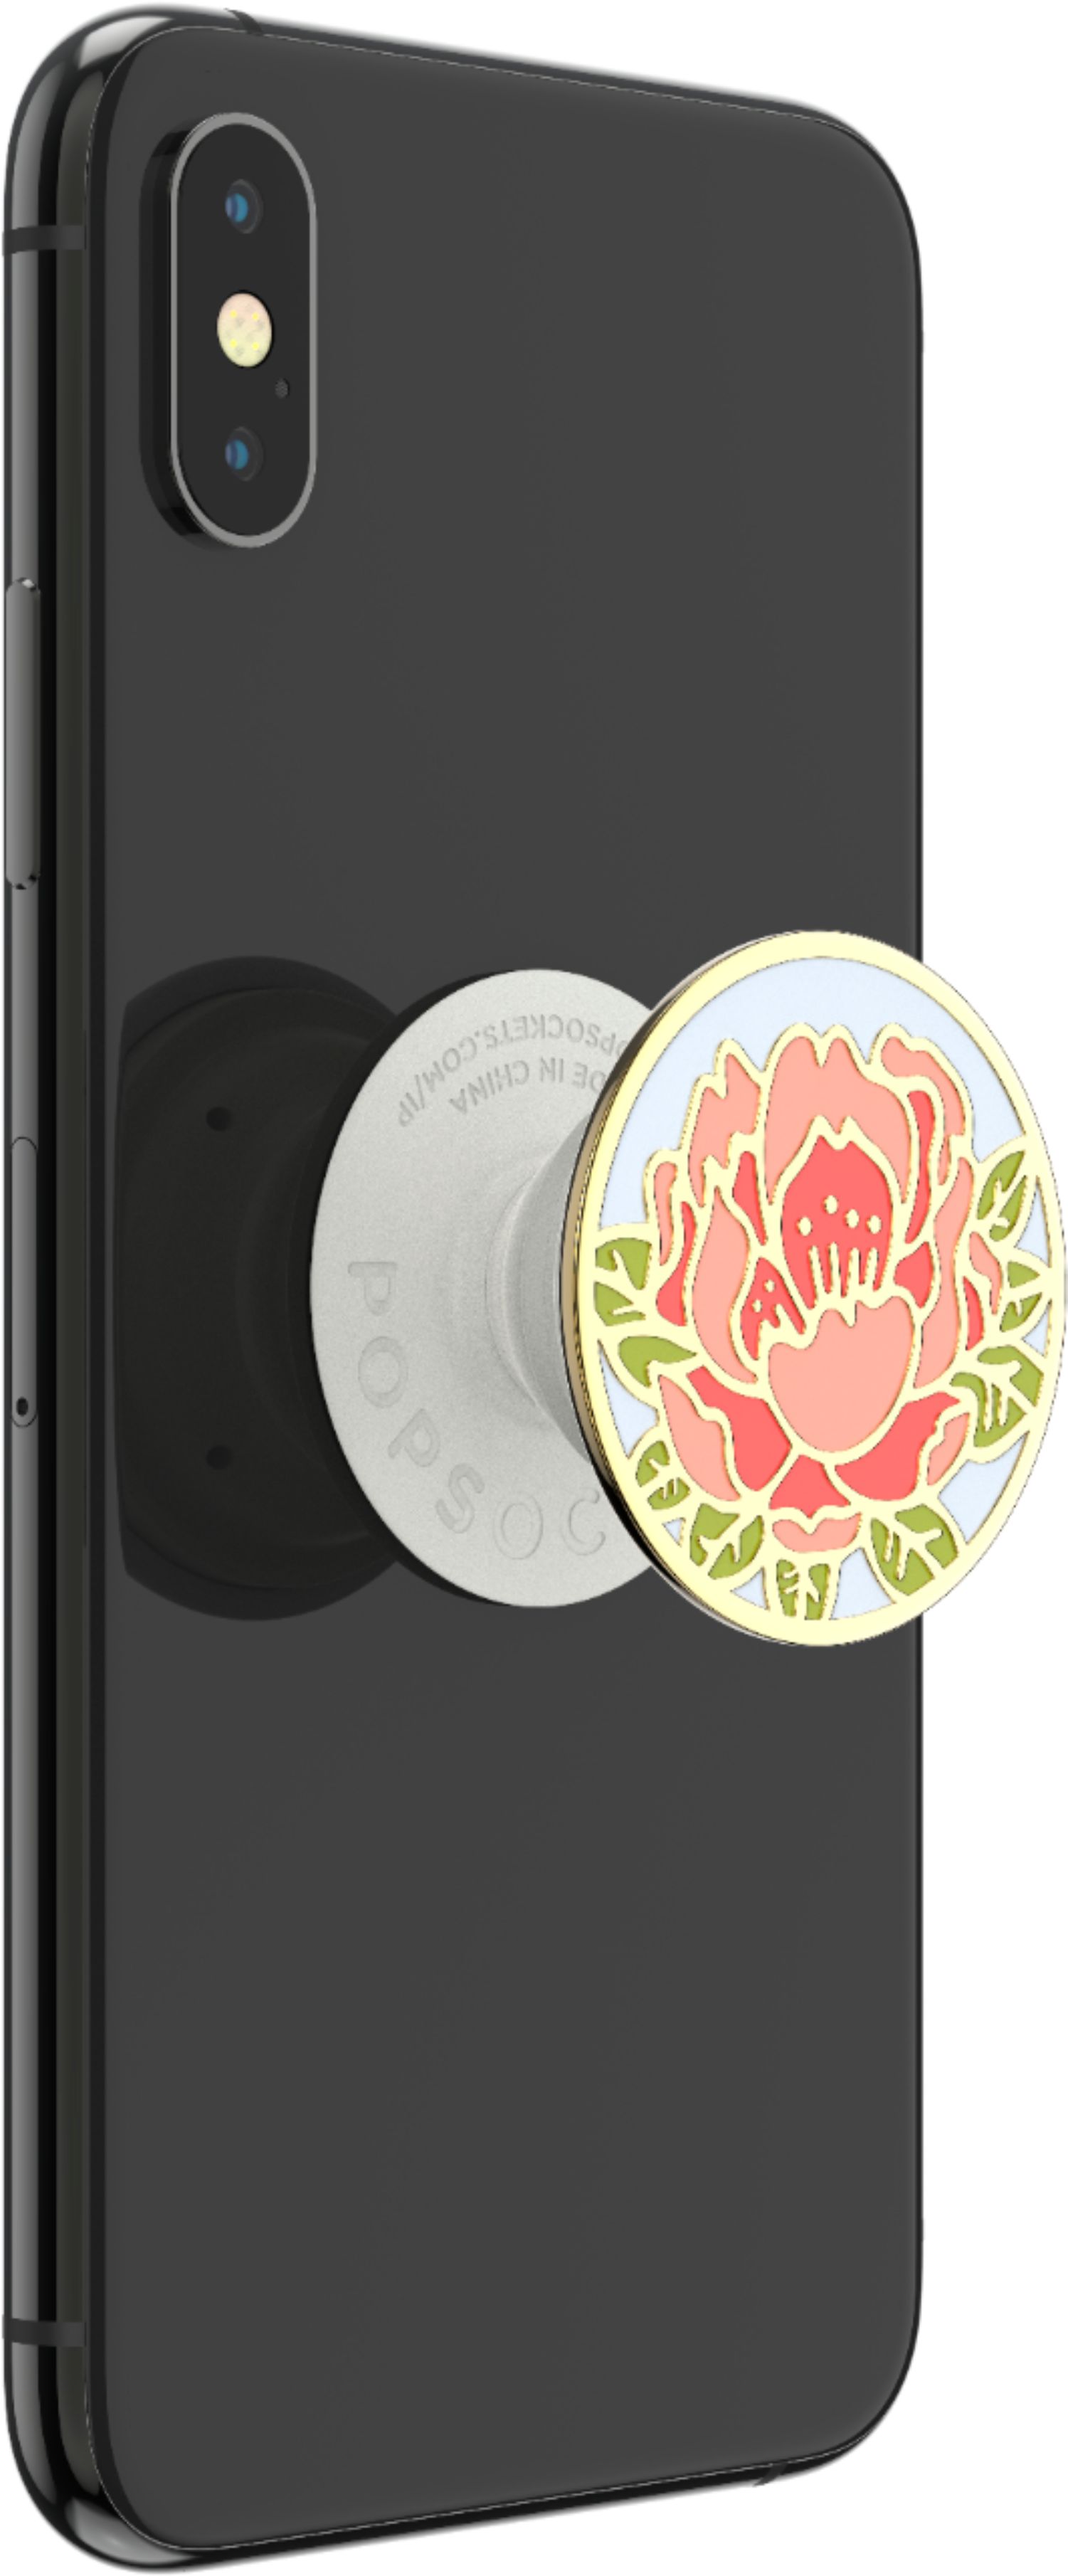 Phone Grip with Expanding Kickstand, Pop Socket for Phone - Midnight Flare  